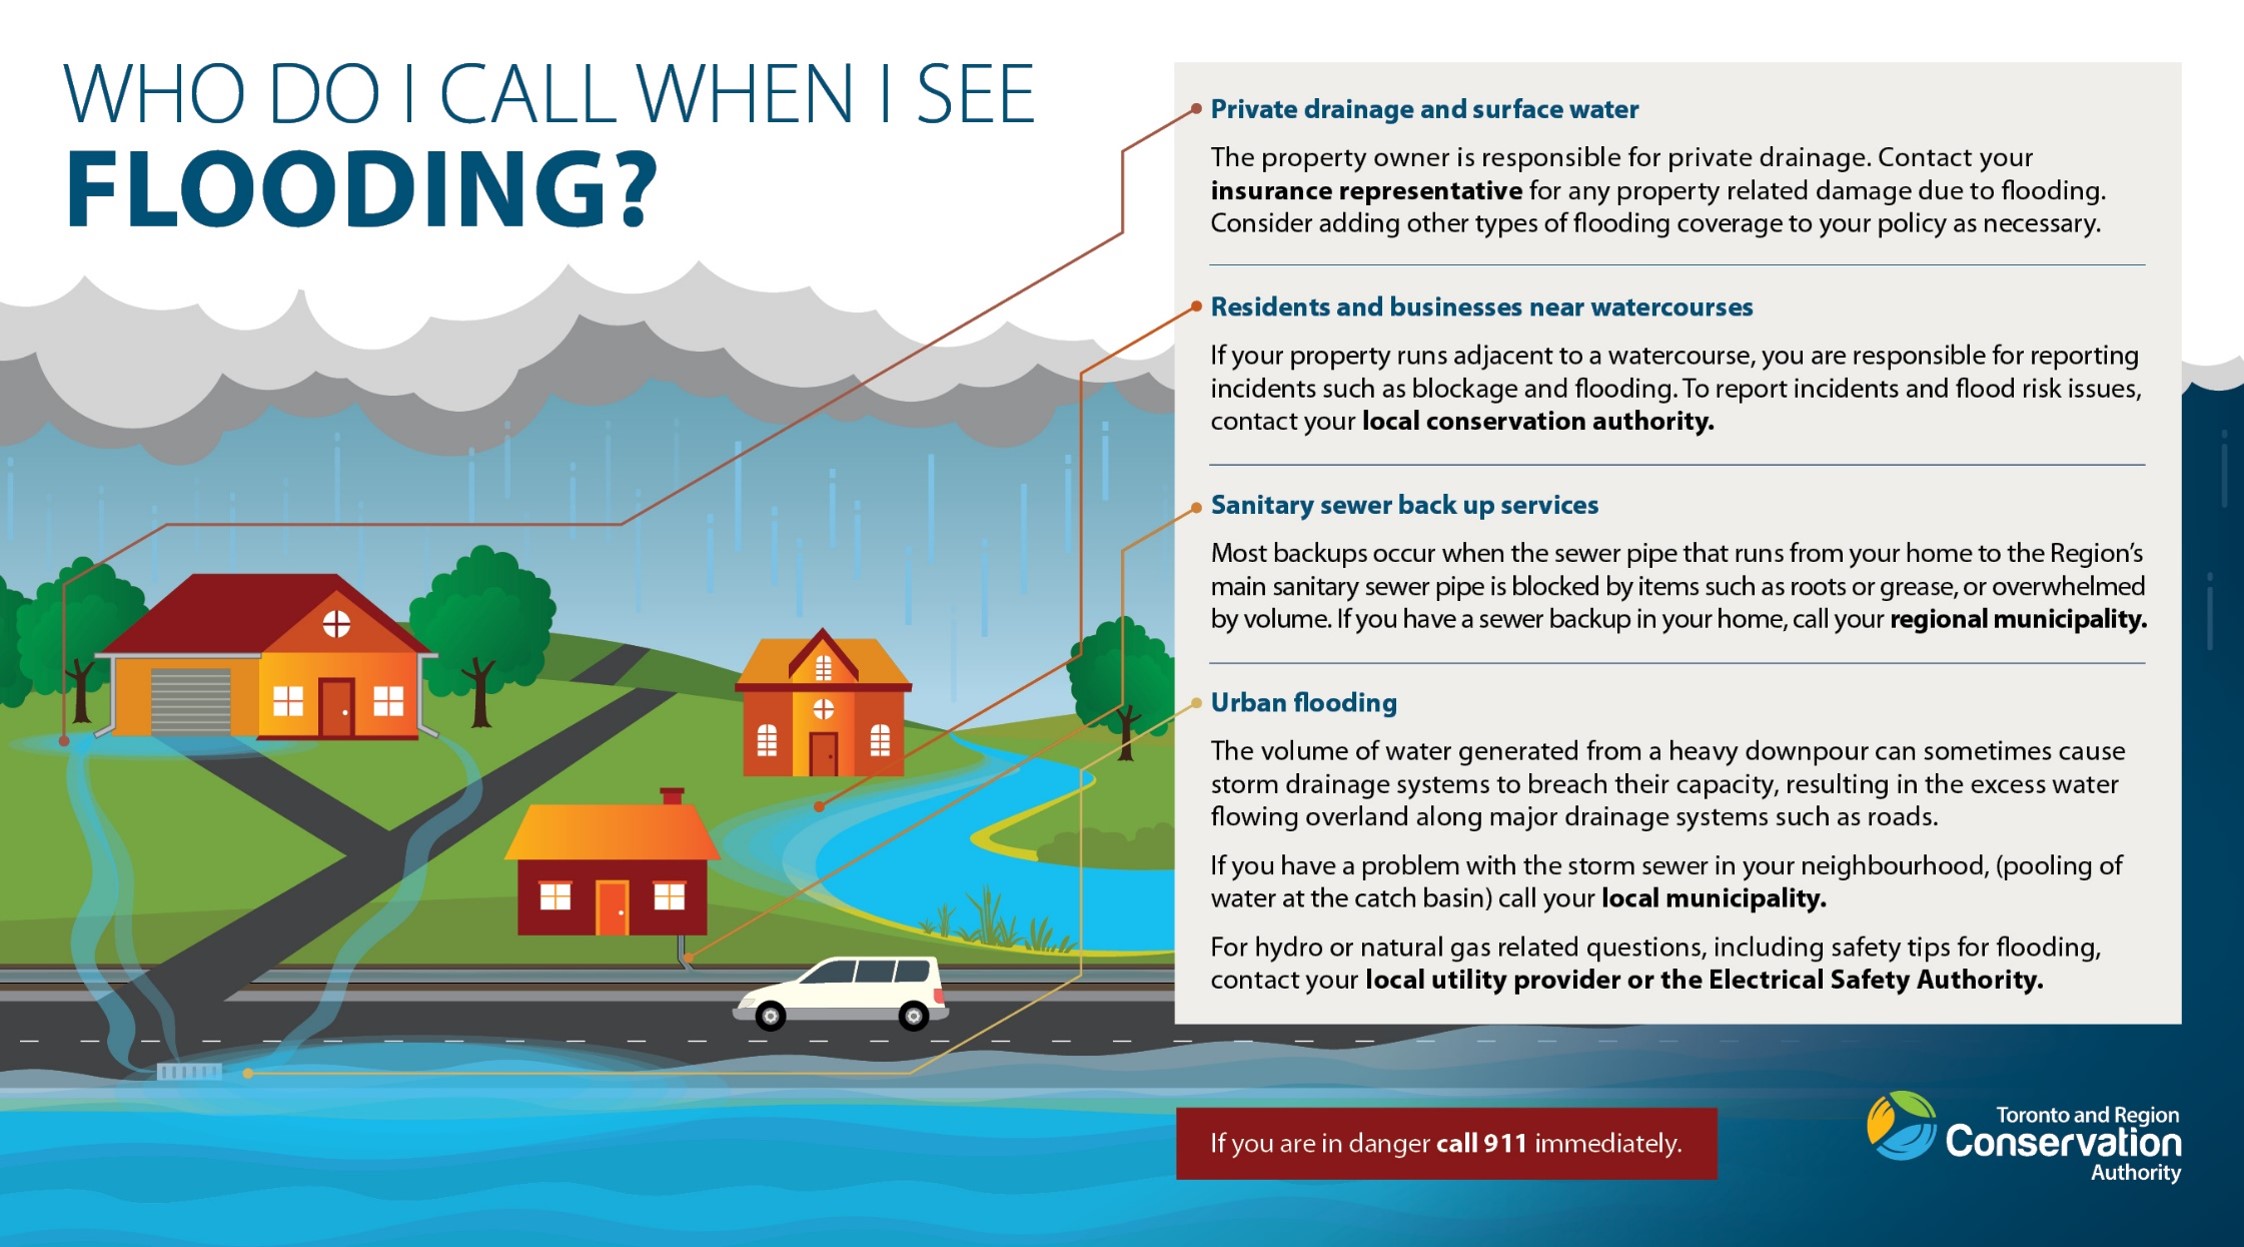 Image repeats information on the page about who to call when you see flooding, including depicting different types of flooding like at your home, road, or near a waterbody. 